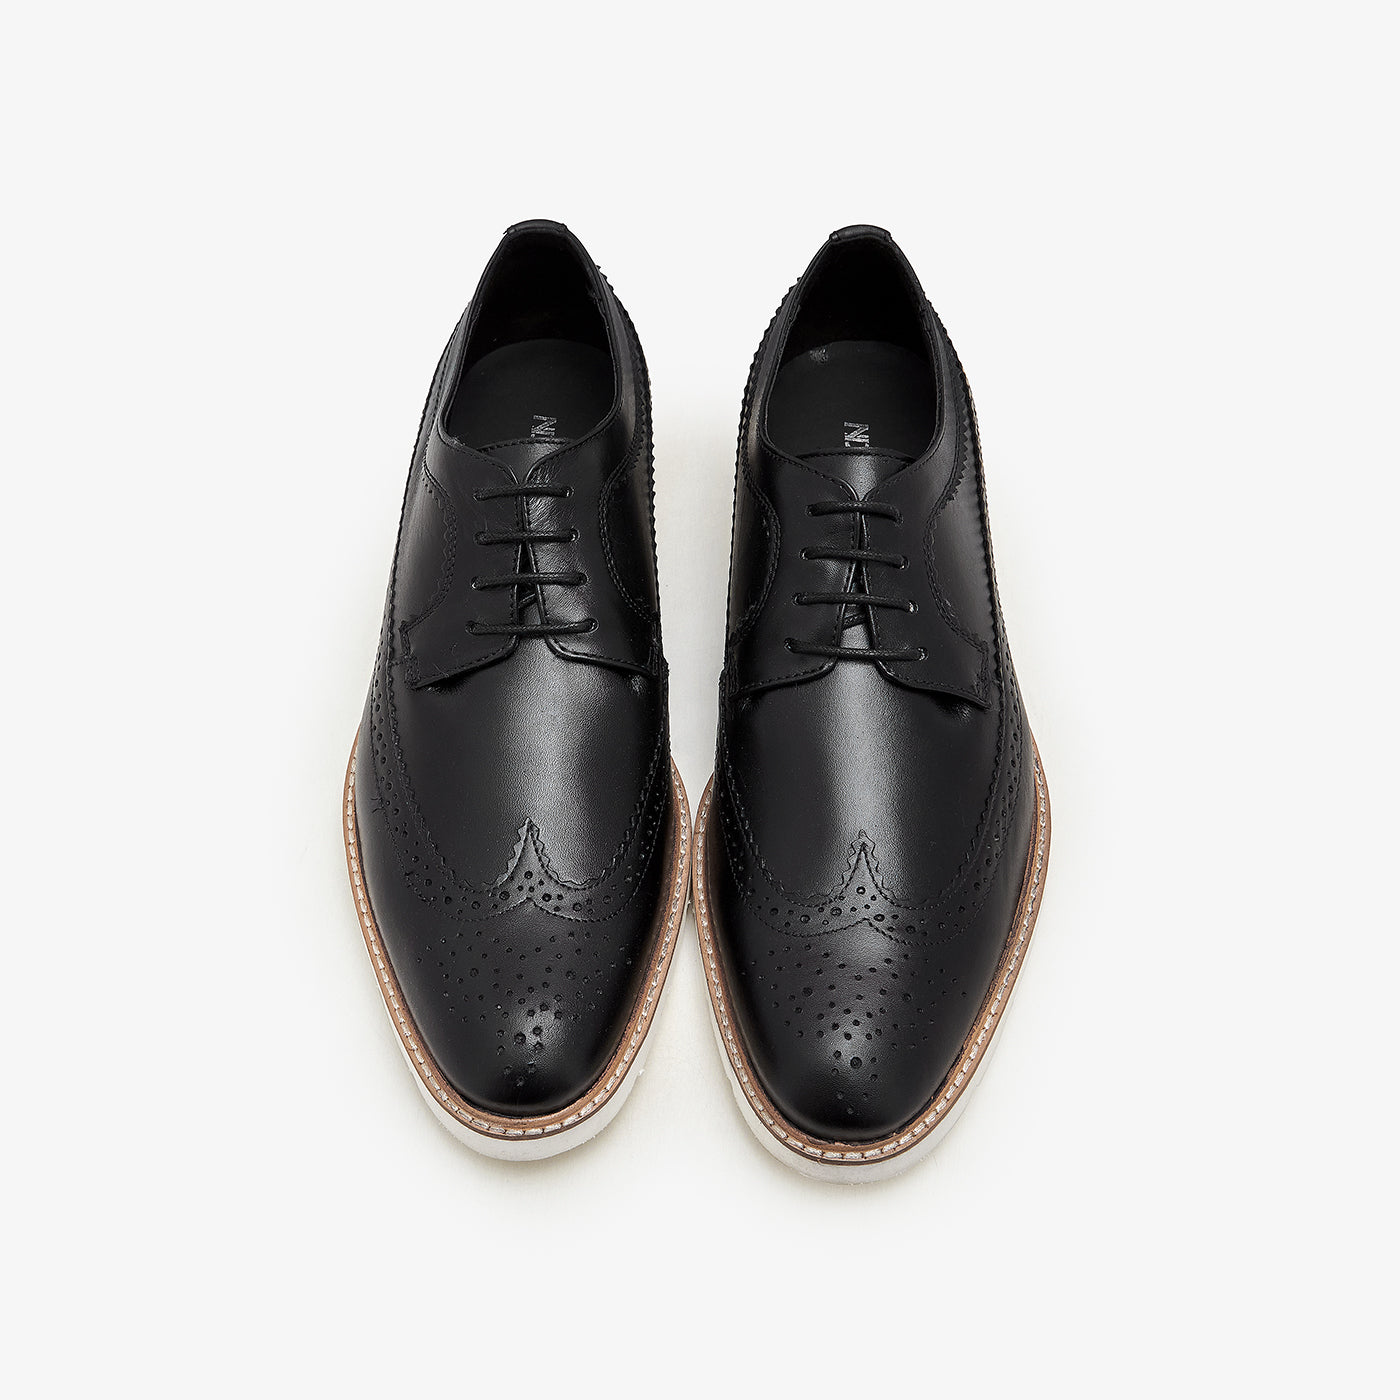 Men's Luxurious Leather Brogues